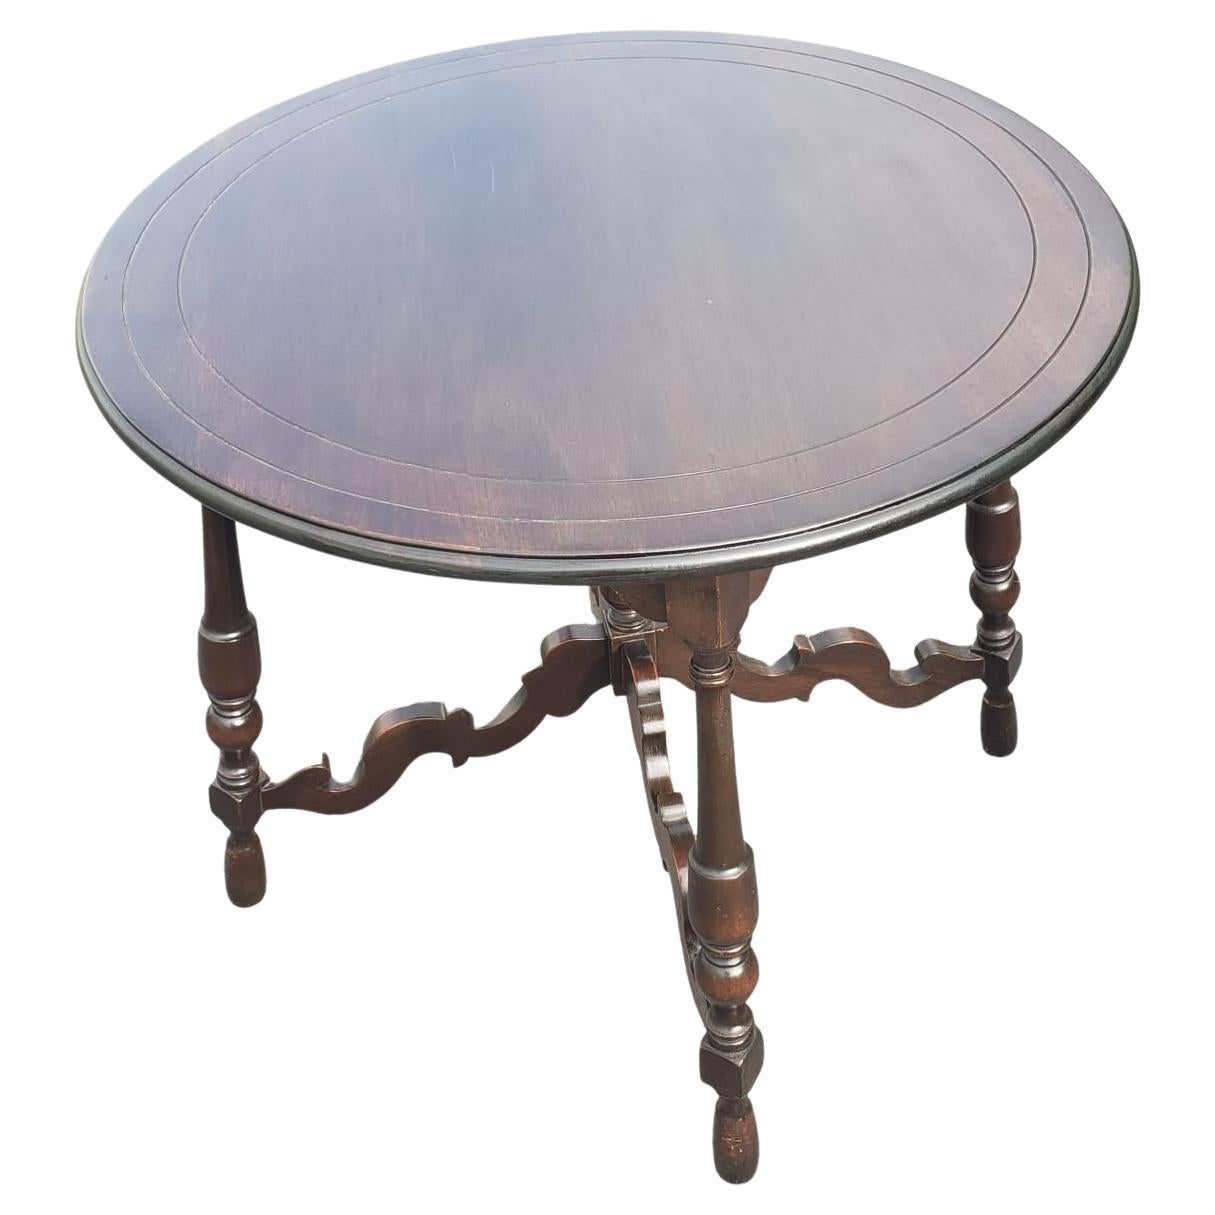 1930s Edwardian Walnut Center Table or Tea Table In Good Condition For Sale In Germantown, MD